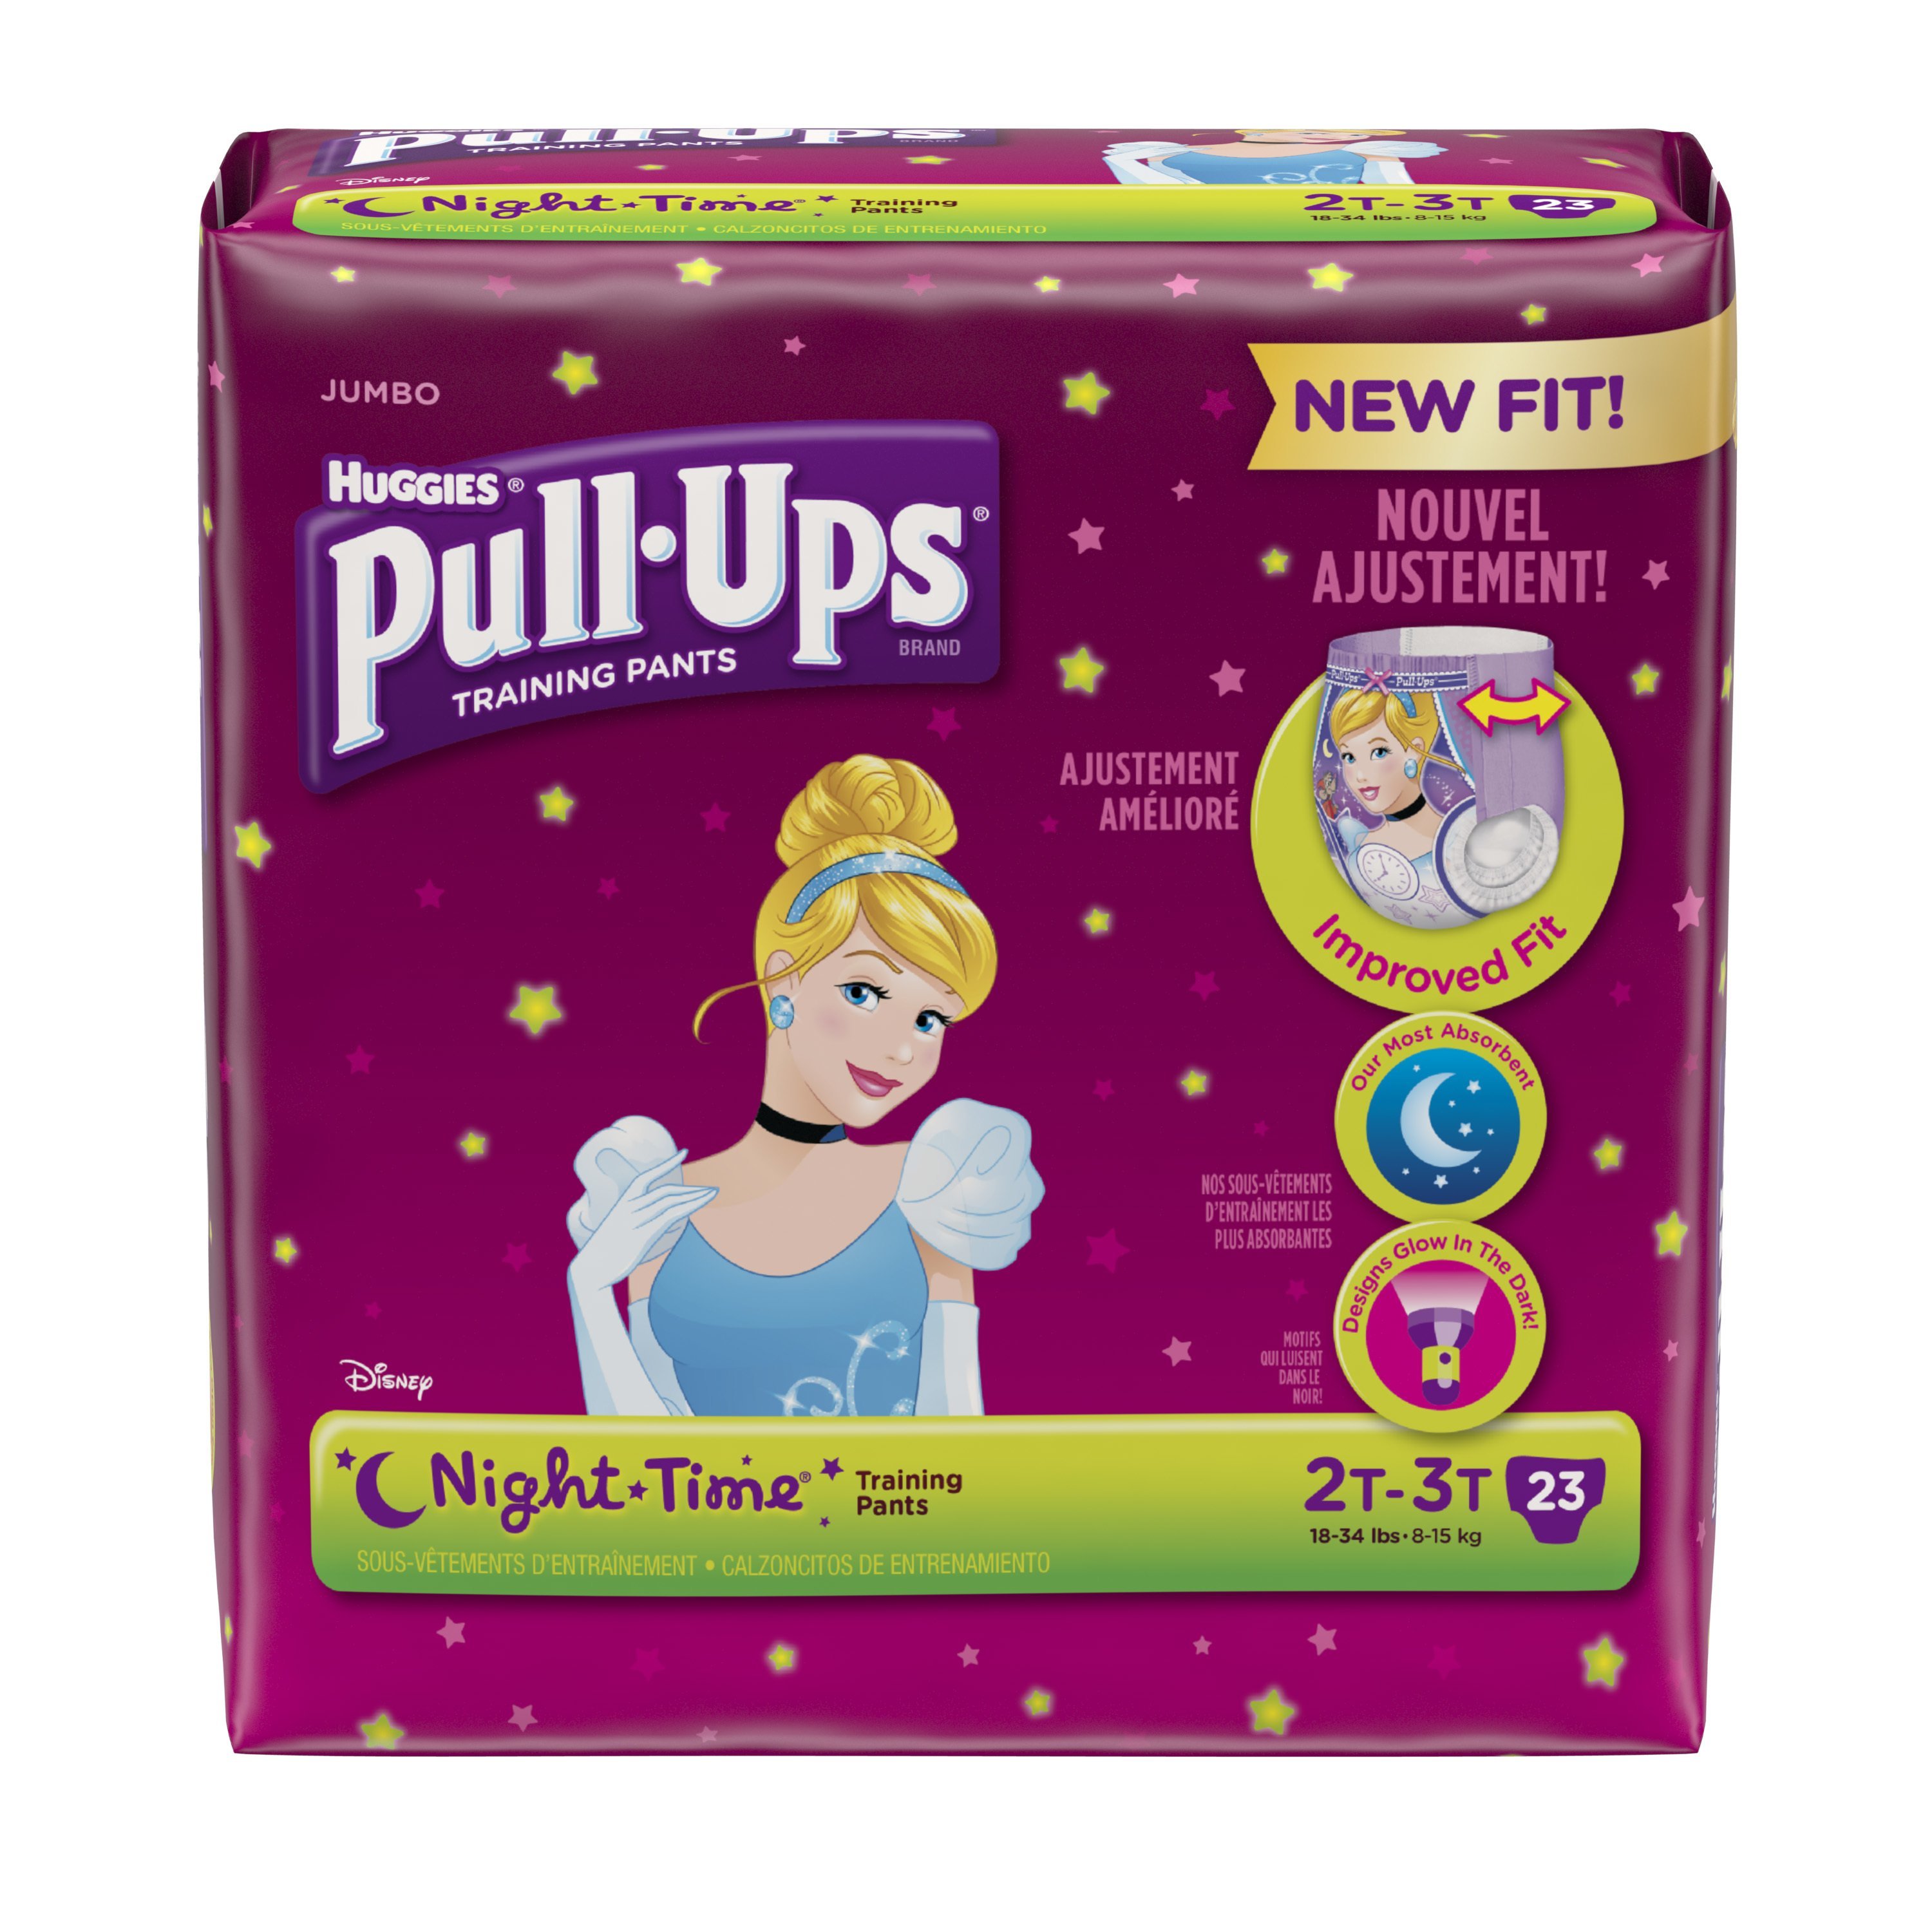 Pull-Ups Night-Time Potty Training Pants for Girls, 2T-3T (18-34 lb.), 23 Ct. (Packaging May Vary) - image 1 of 7